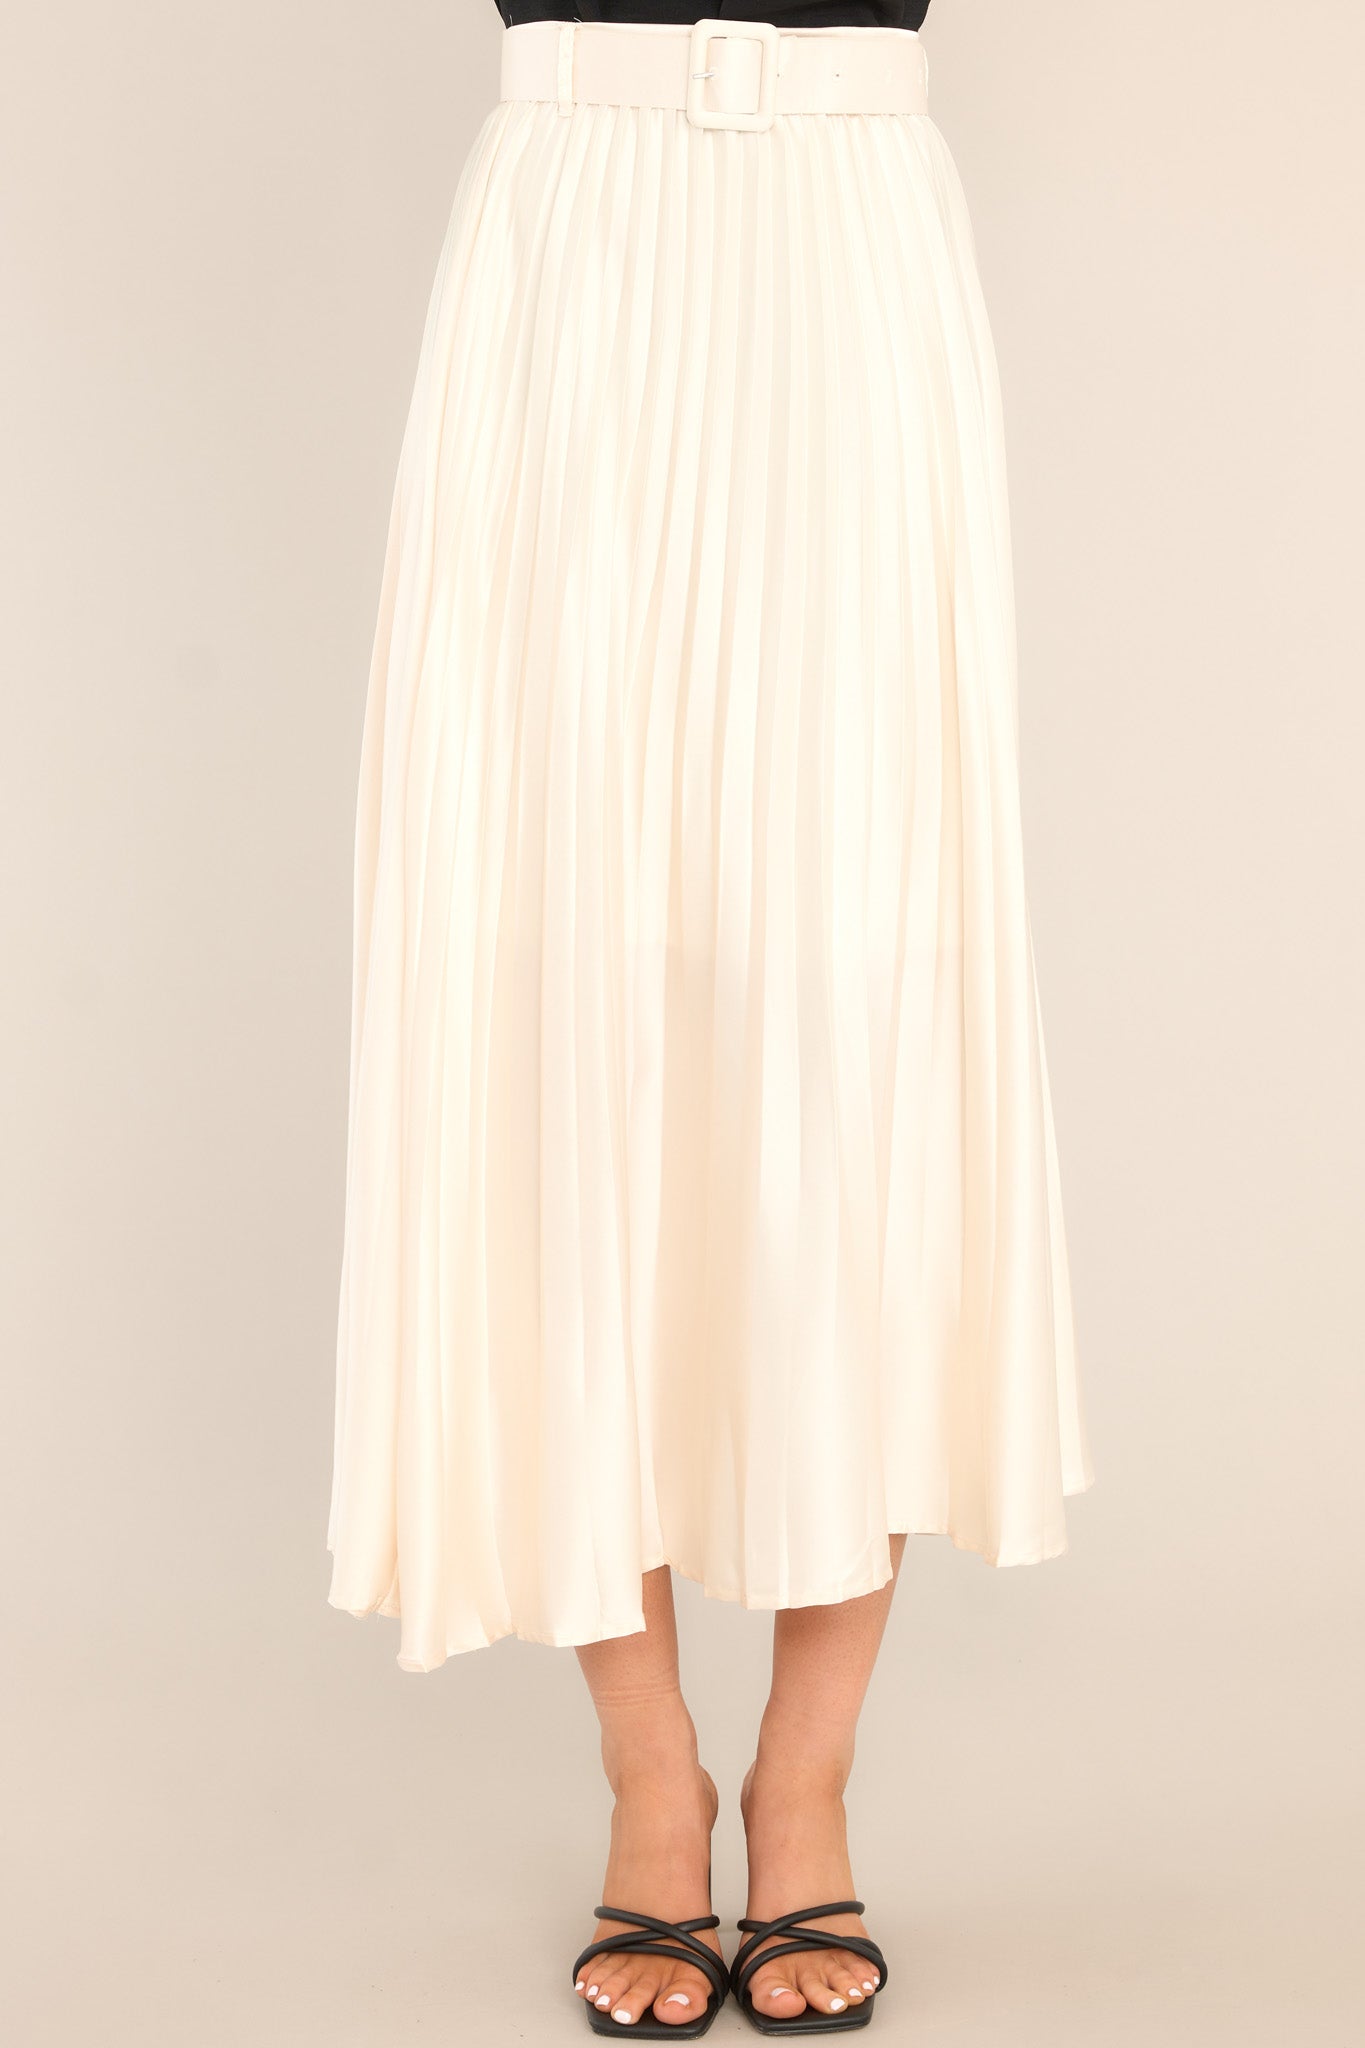 Front view of this maxi skirt that features pleats throughout.